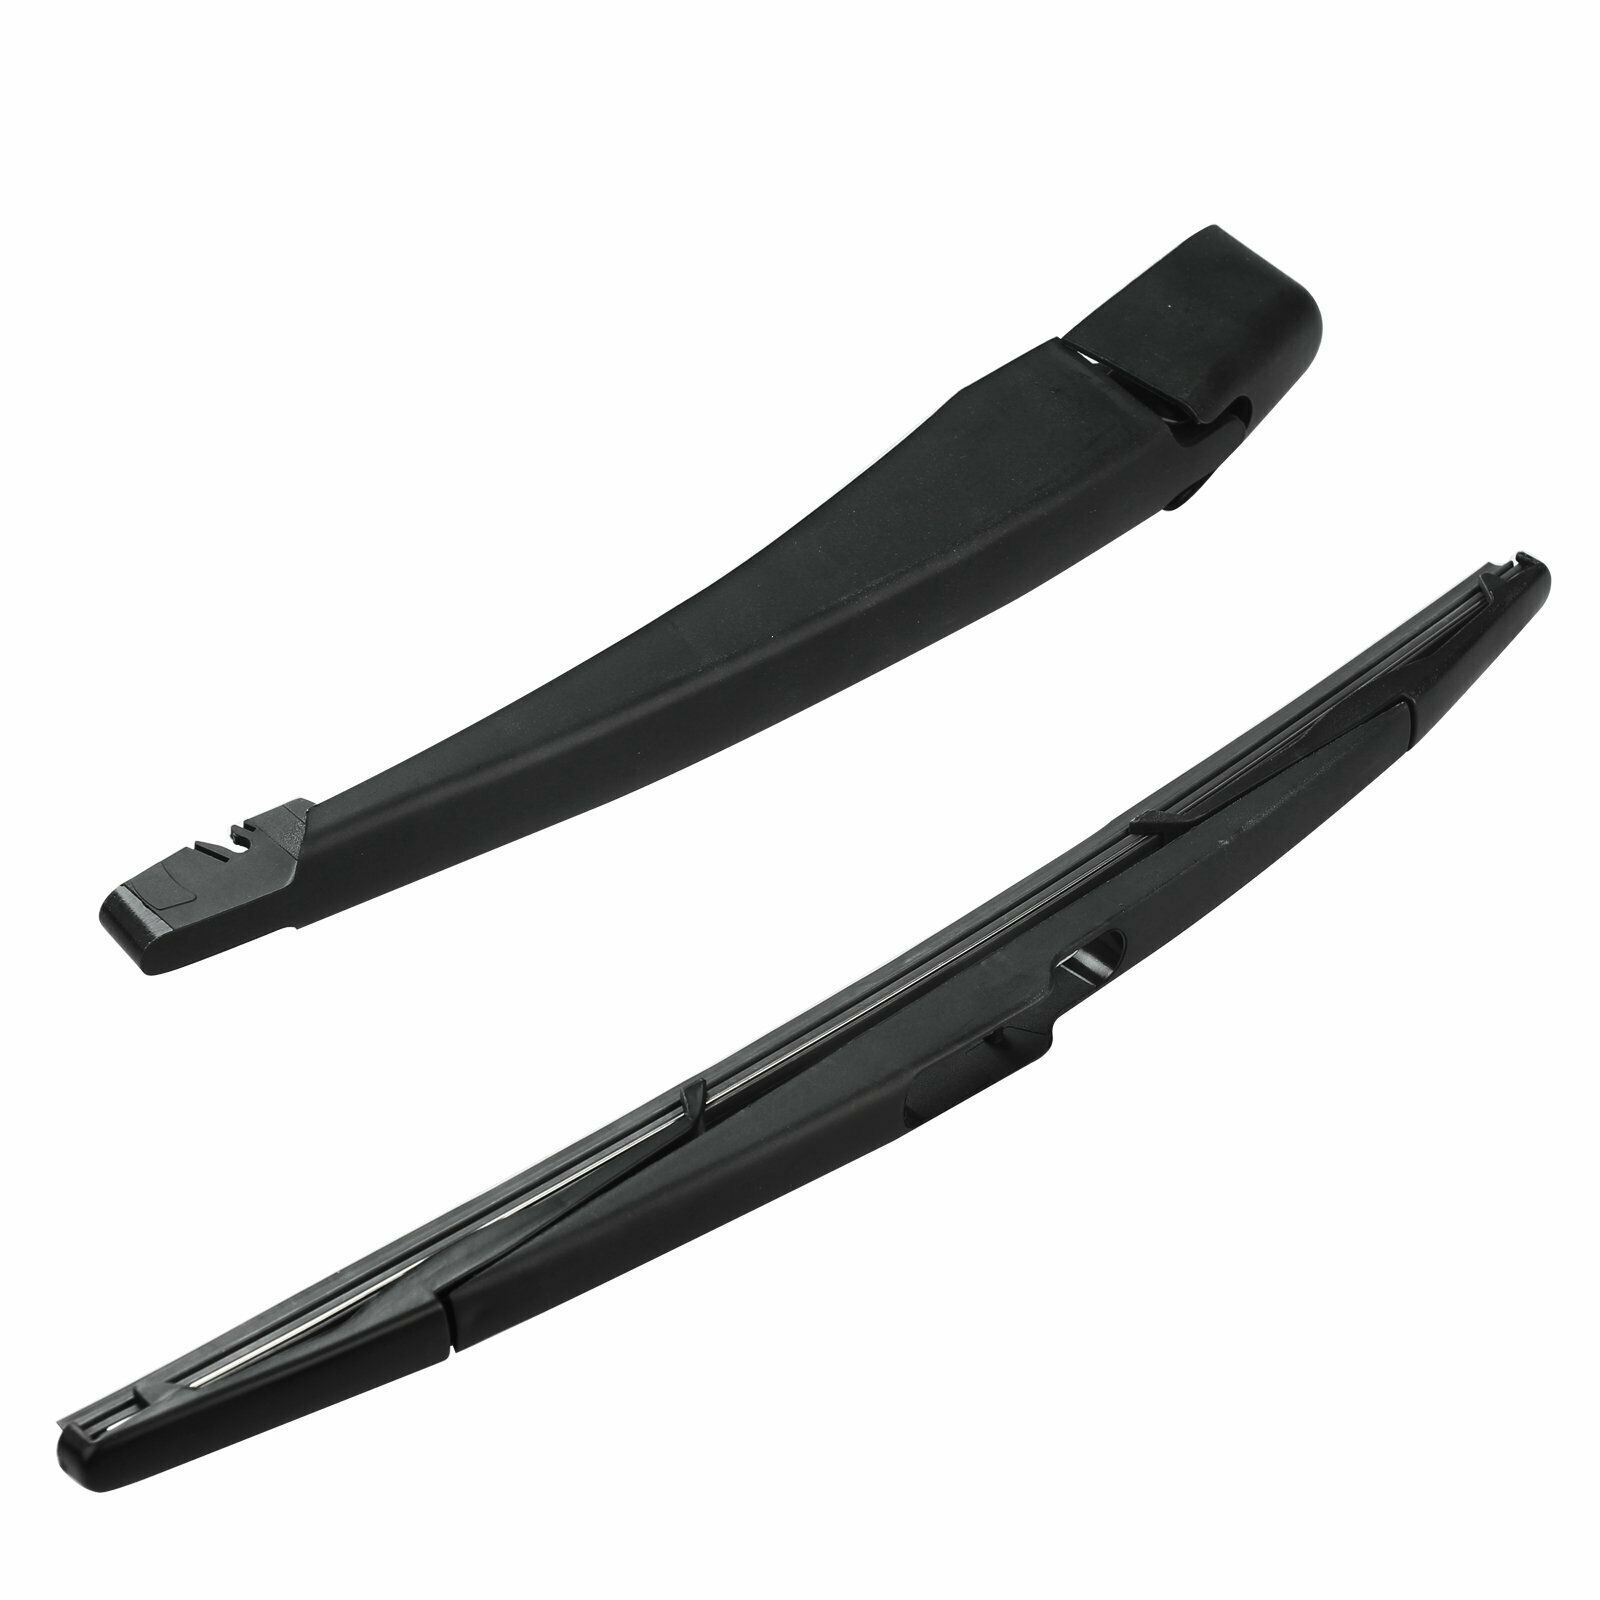 Rear Wiper Arm + Blade Set Fits Dodge Caravan Chrysler Town & Country 2008-2009 - Windshield 2008 Chrysler Town And Country Rear Wiper Blade Size